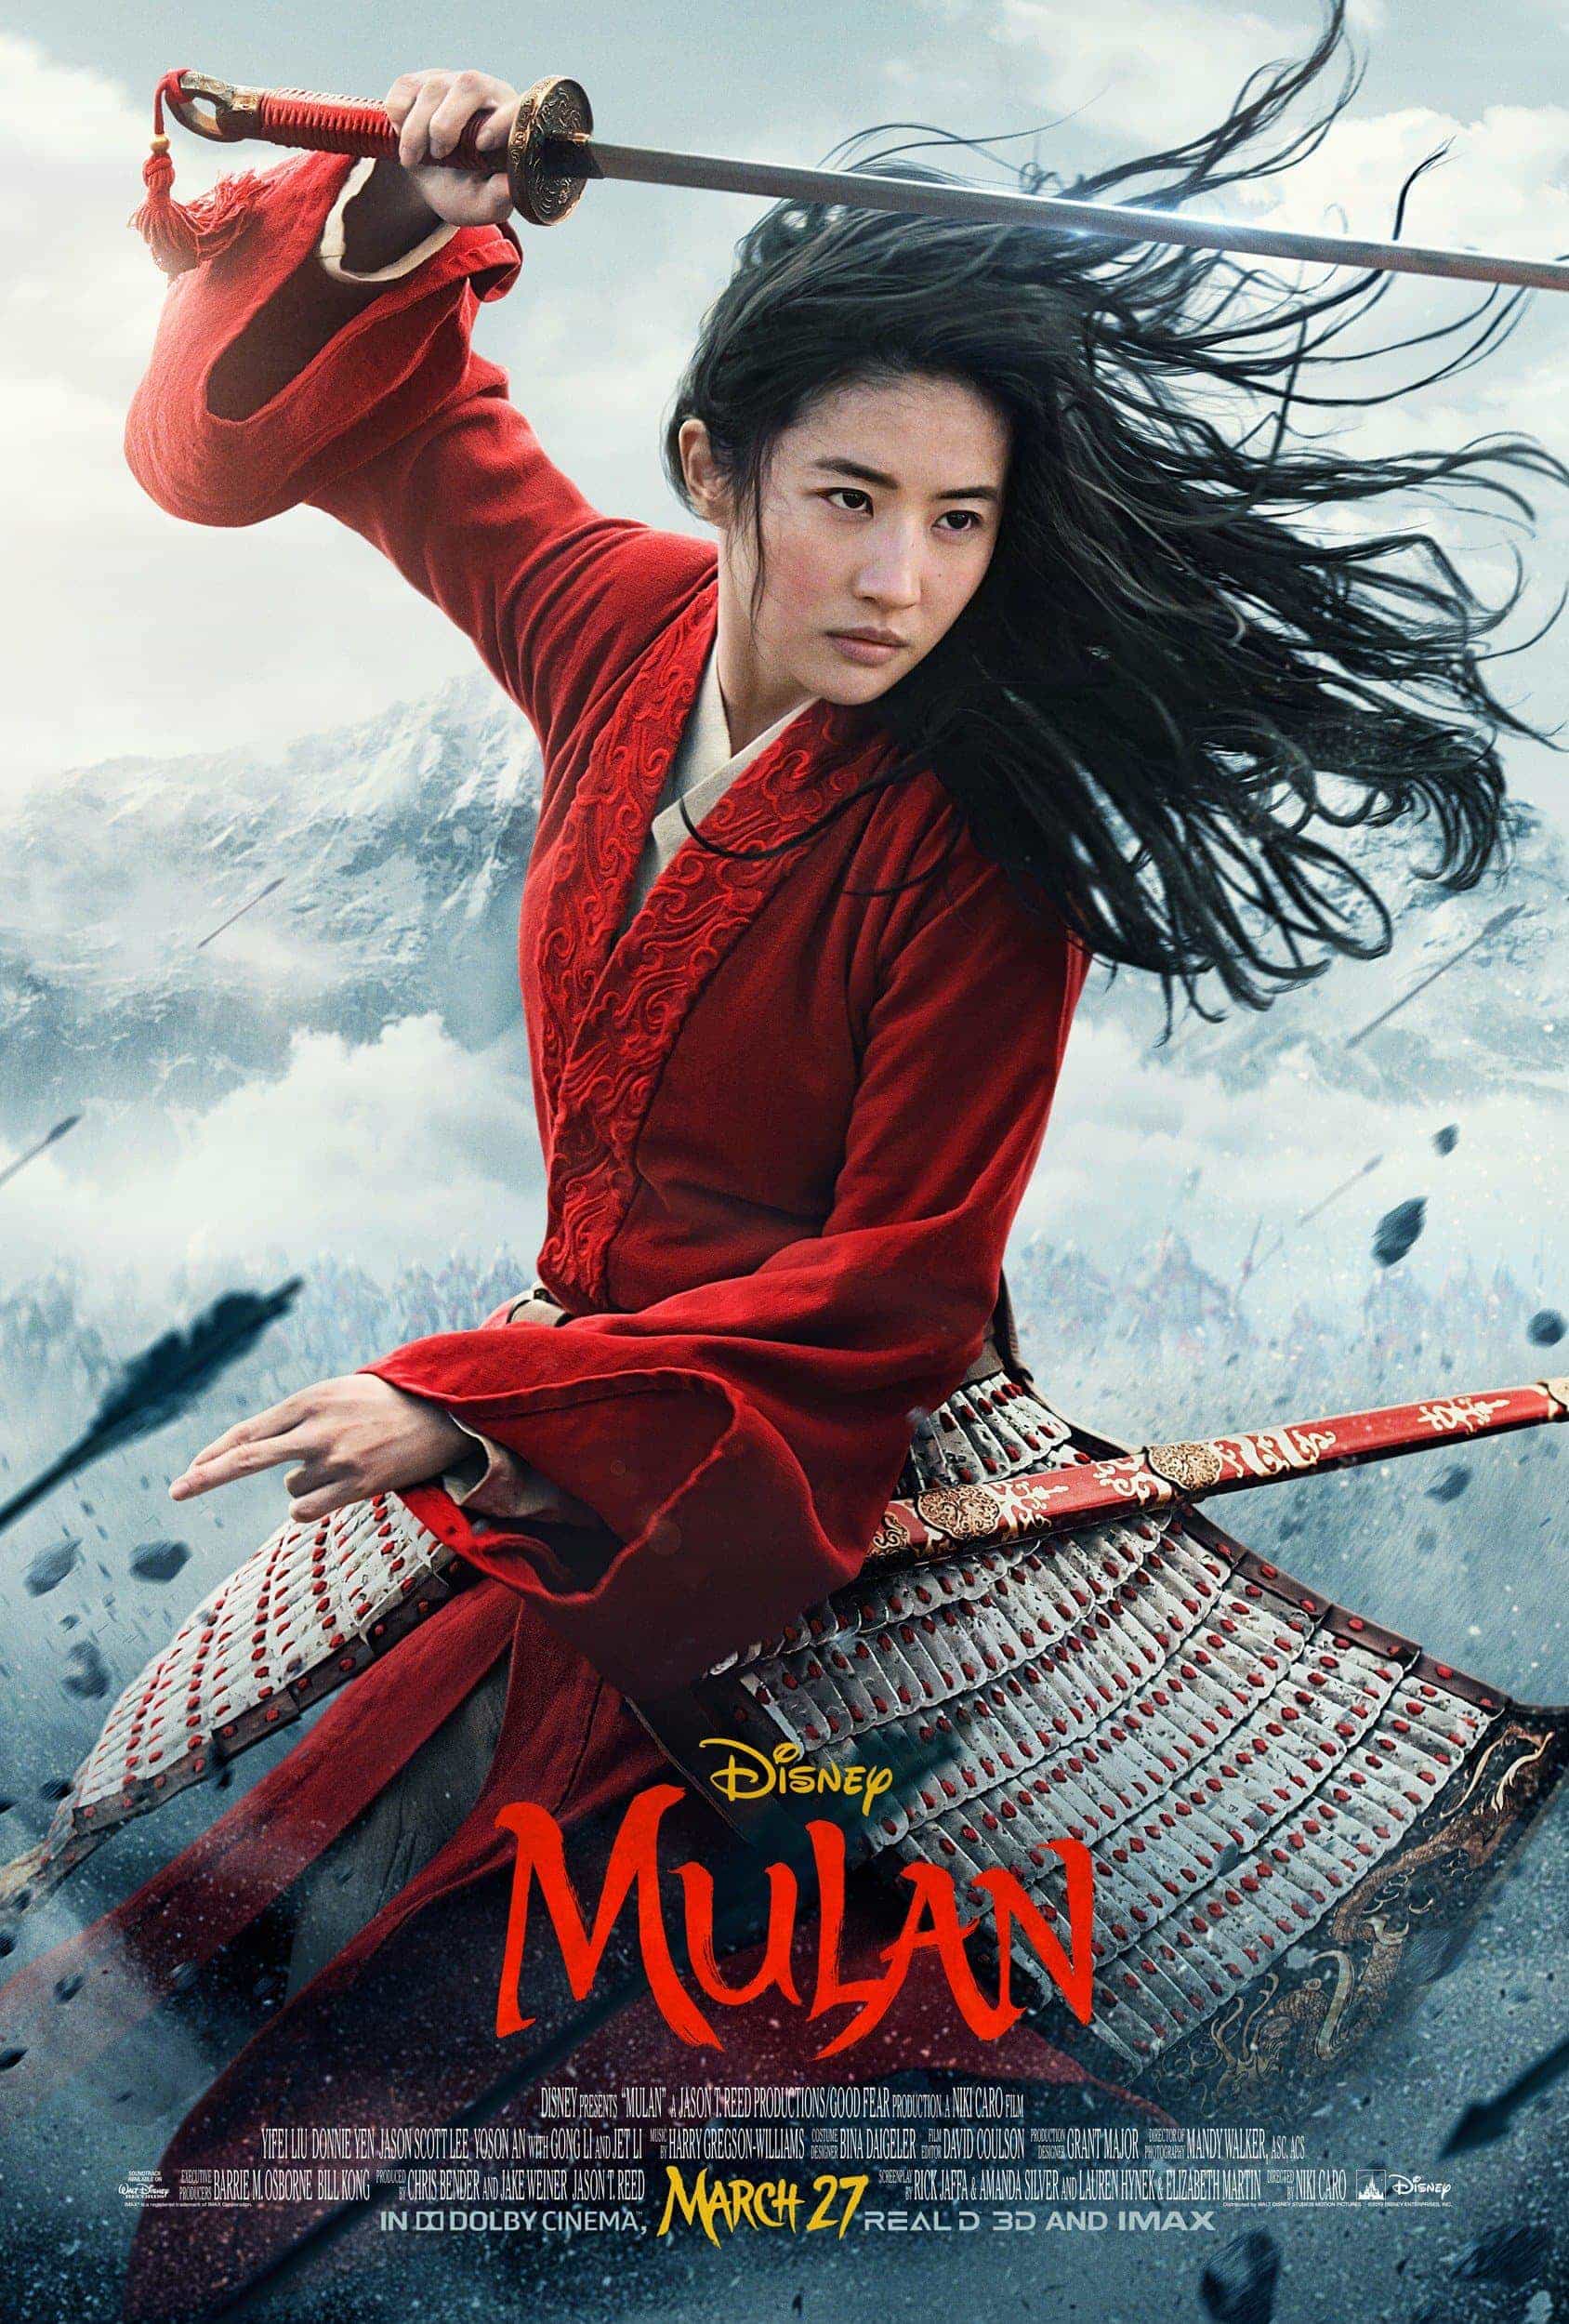 Disney release a new trailer for the live action remake of Mulan